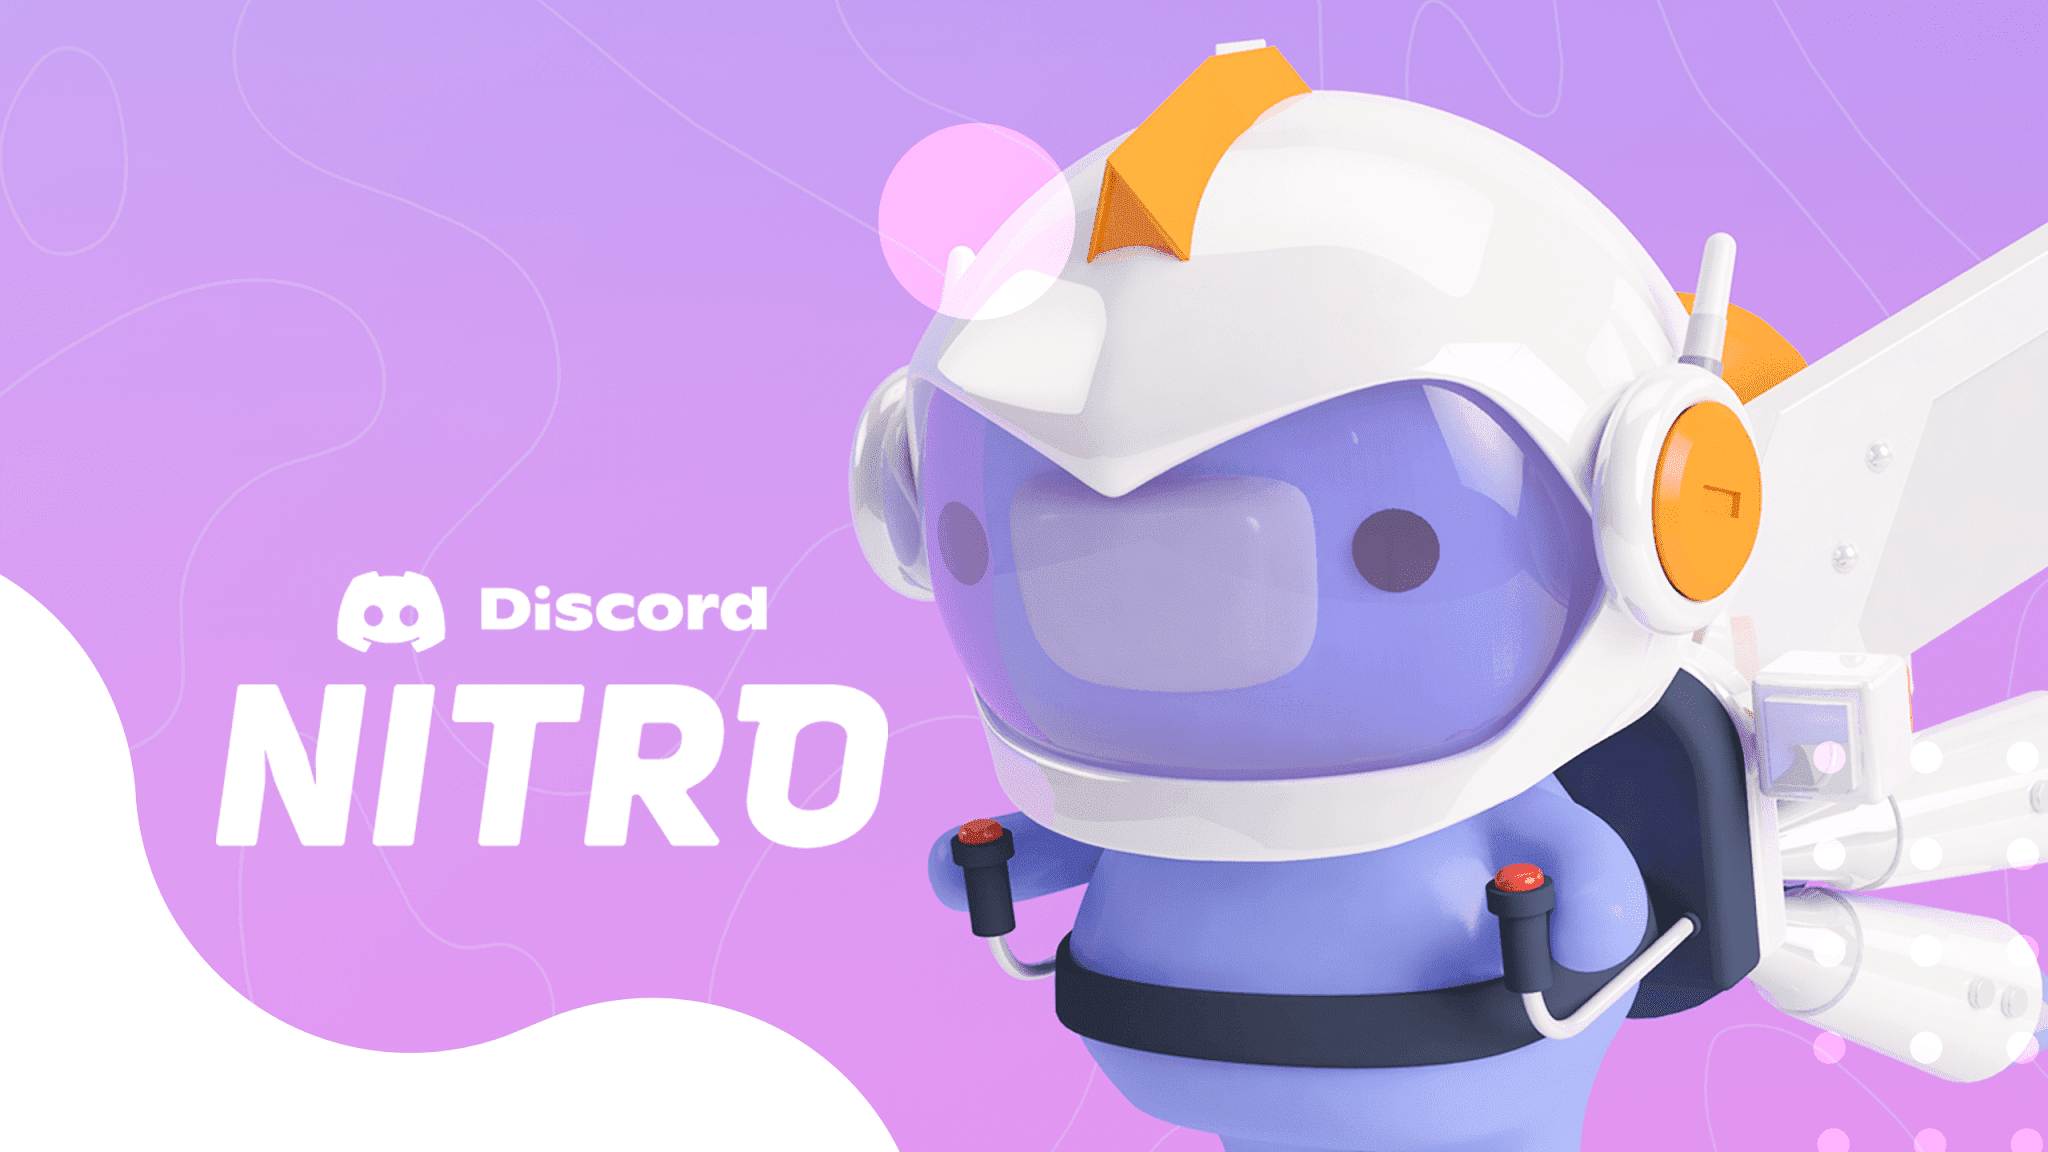 How to get 3 months discord nitro for free